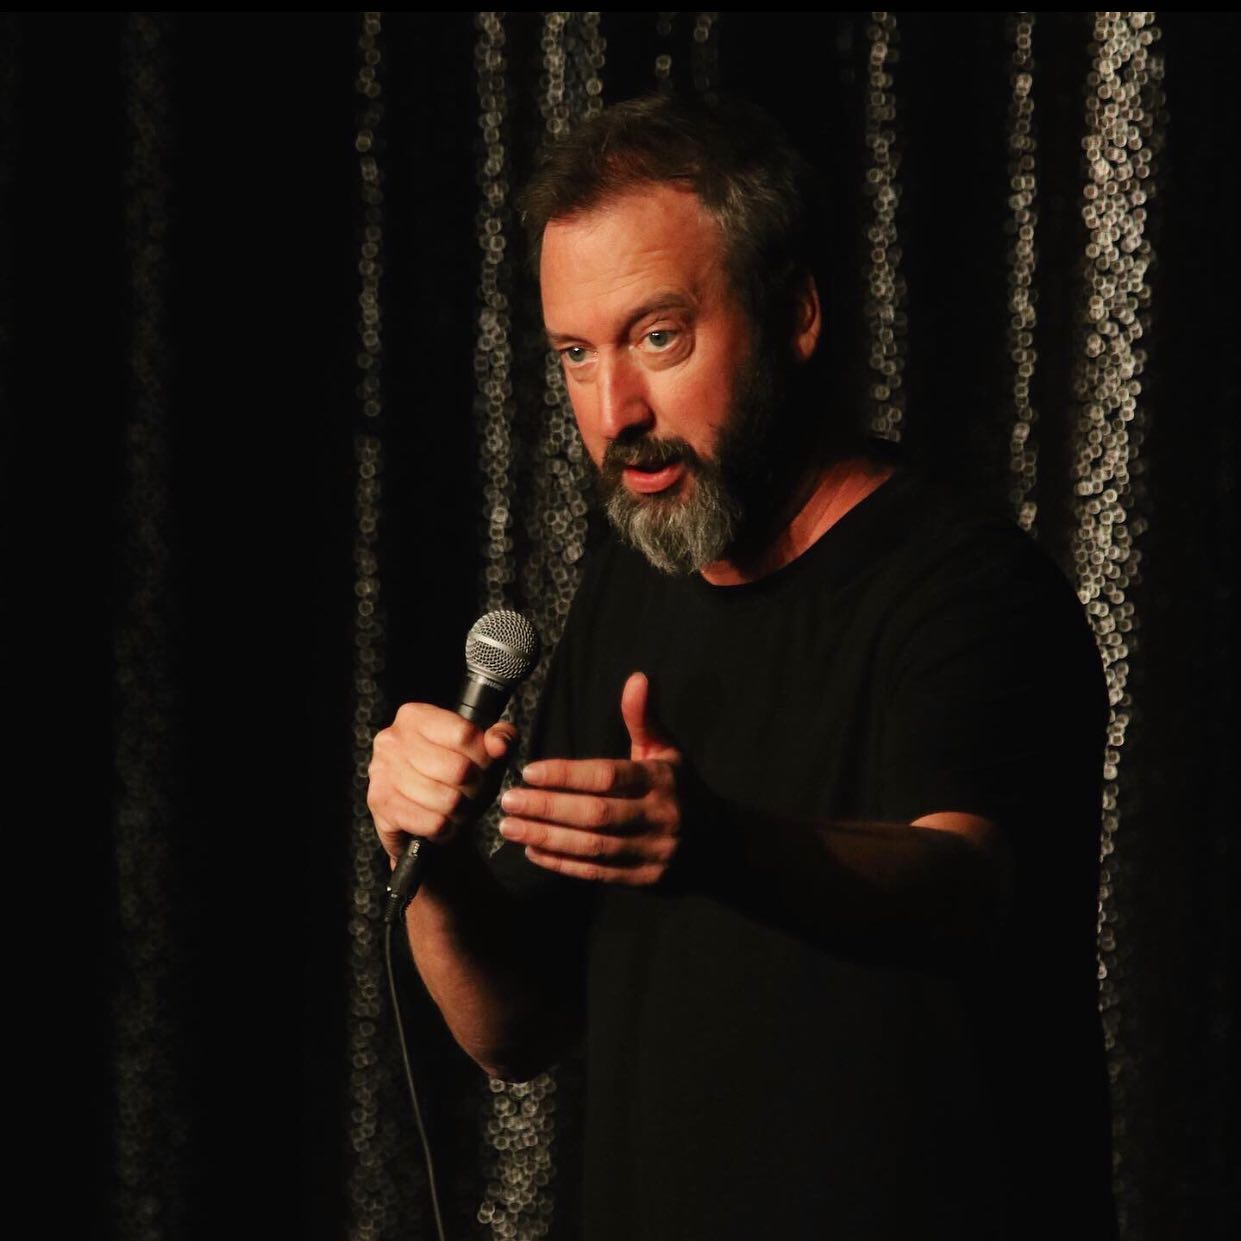 ‪Two more shows tonight @pittsburghimprov Thank you for the great weekend!  Last night was awesome!  Tonight is gonna be crazy! (A few tickets left for my show on Sunday if ya wanna keep the party going!) #tomgreen‬